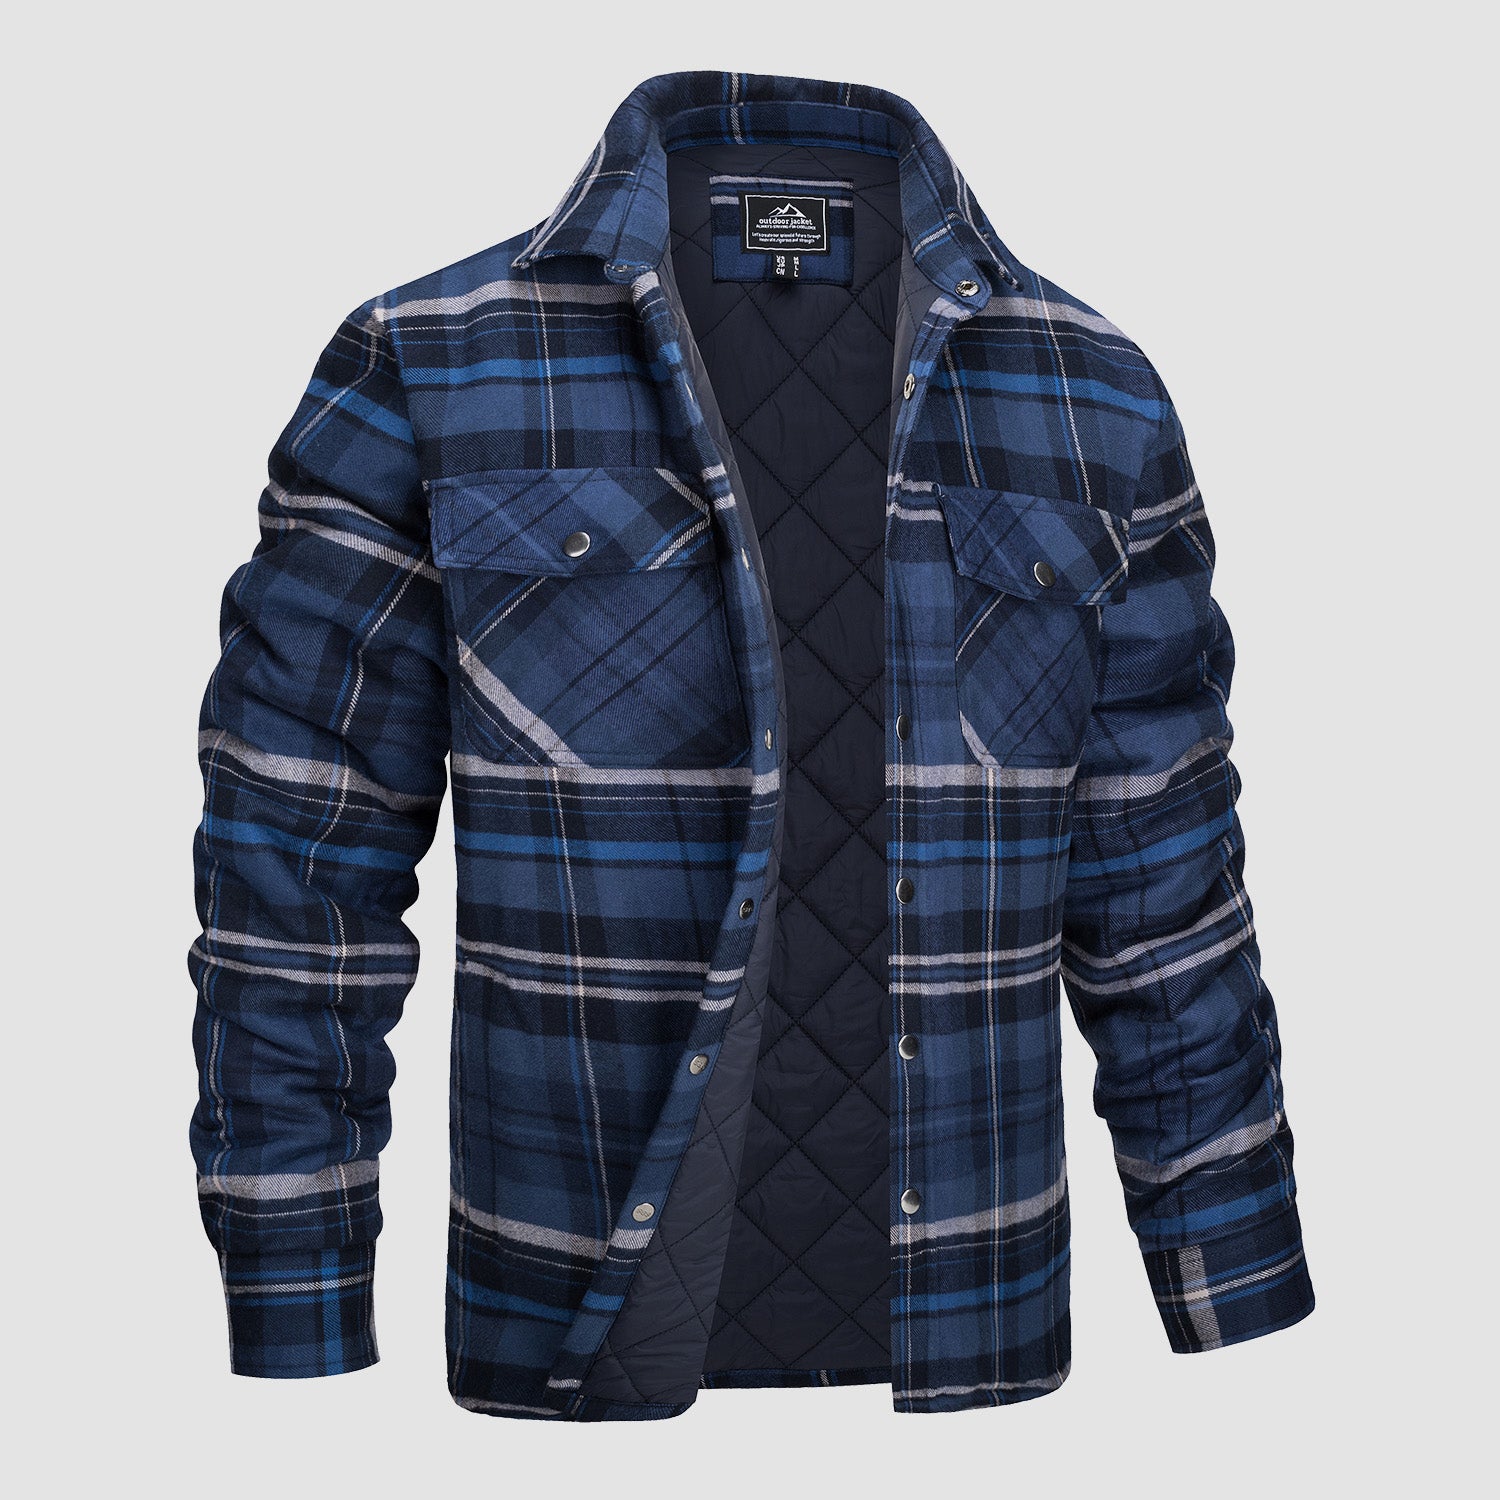 Men's Flannel Shirt Jacket Long Sleeve Quilted Lined Plaid Coat Button ...